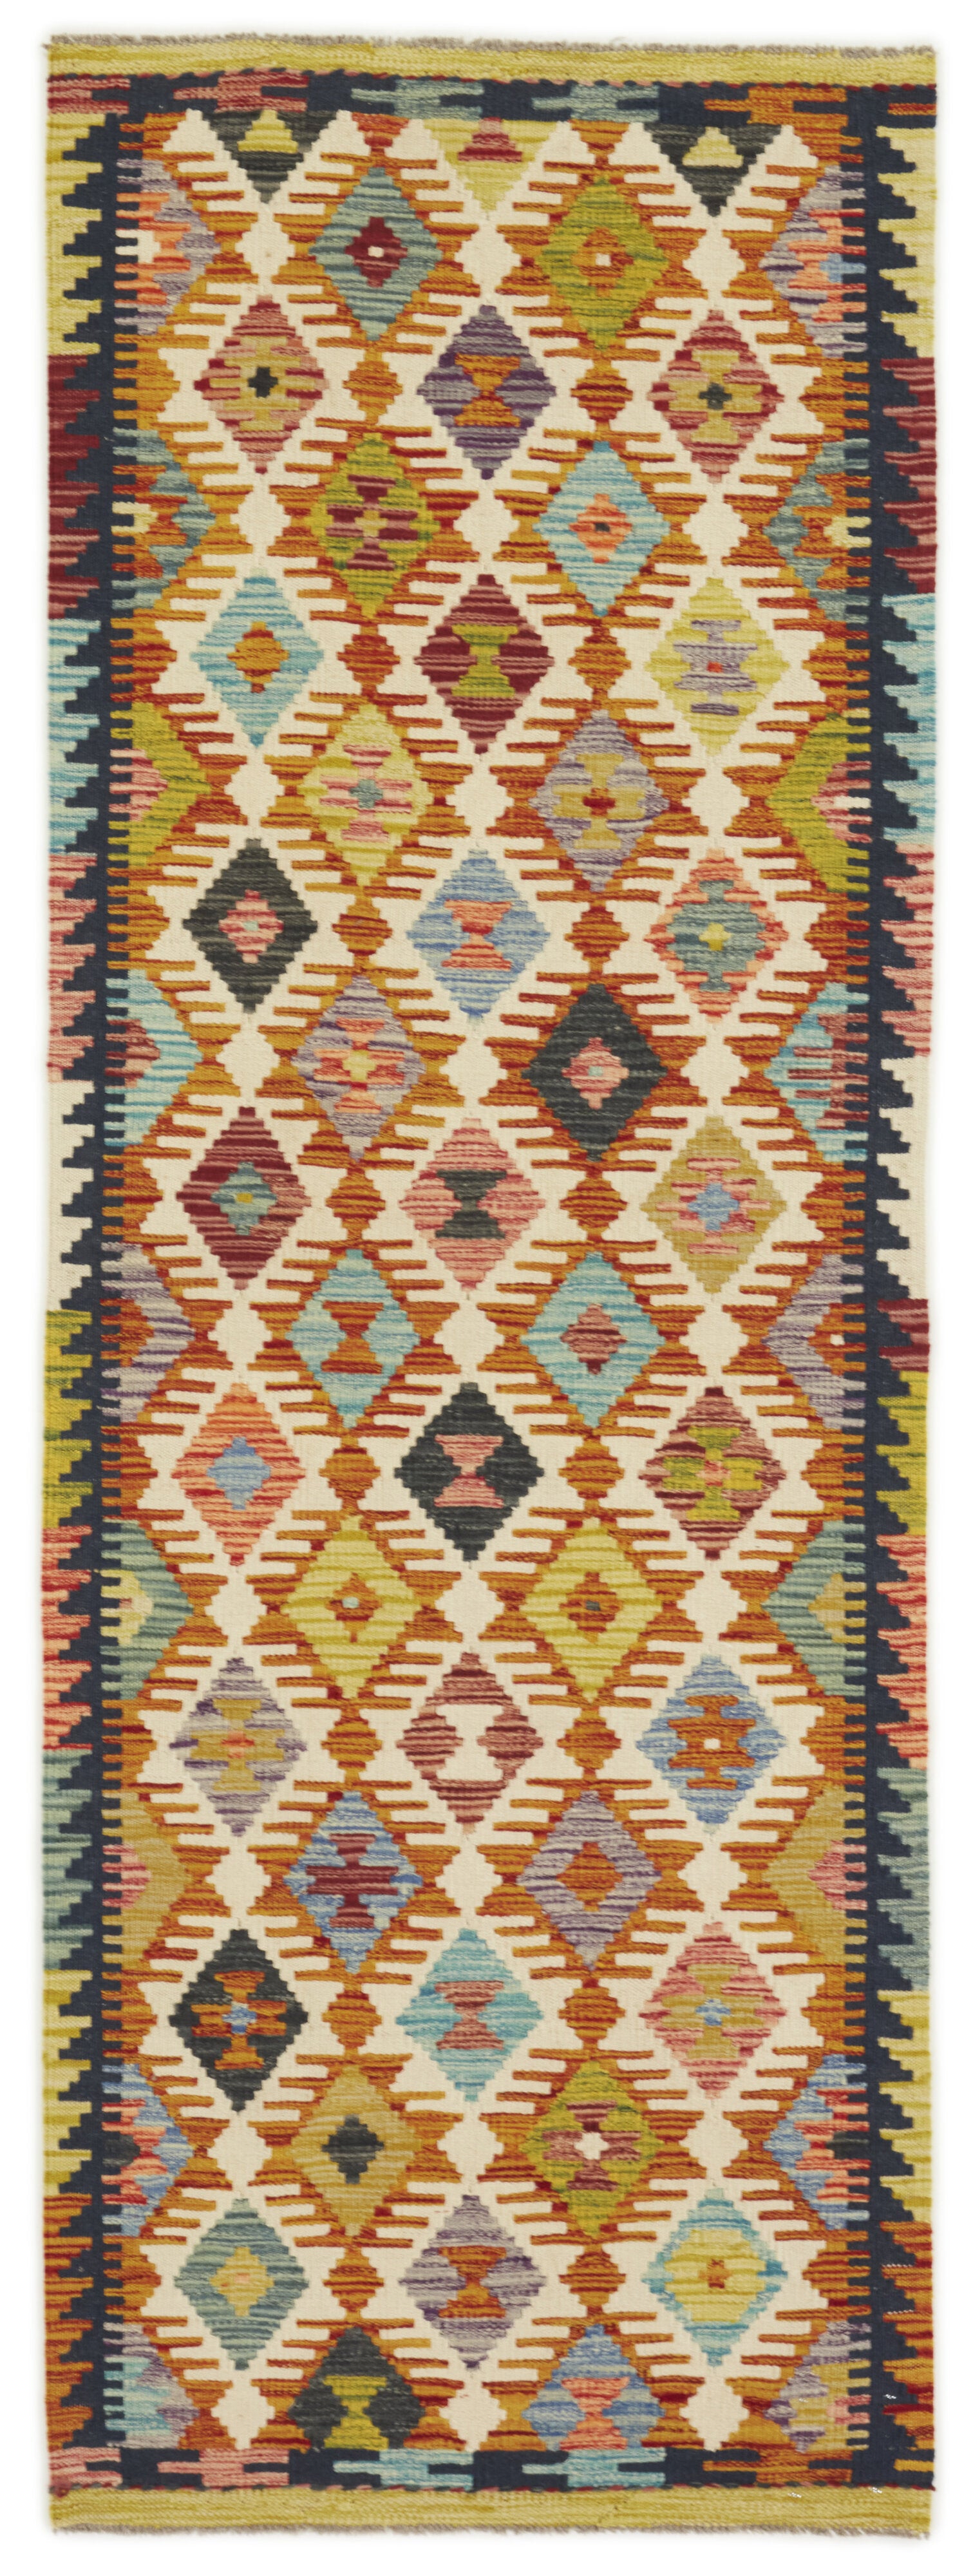 Authentic Afghan Kelim flatweave rug with traditional multicolour pattern.

